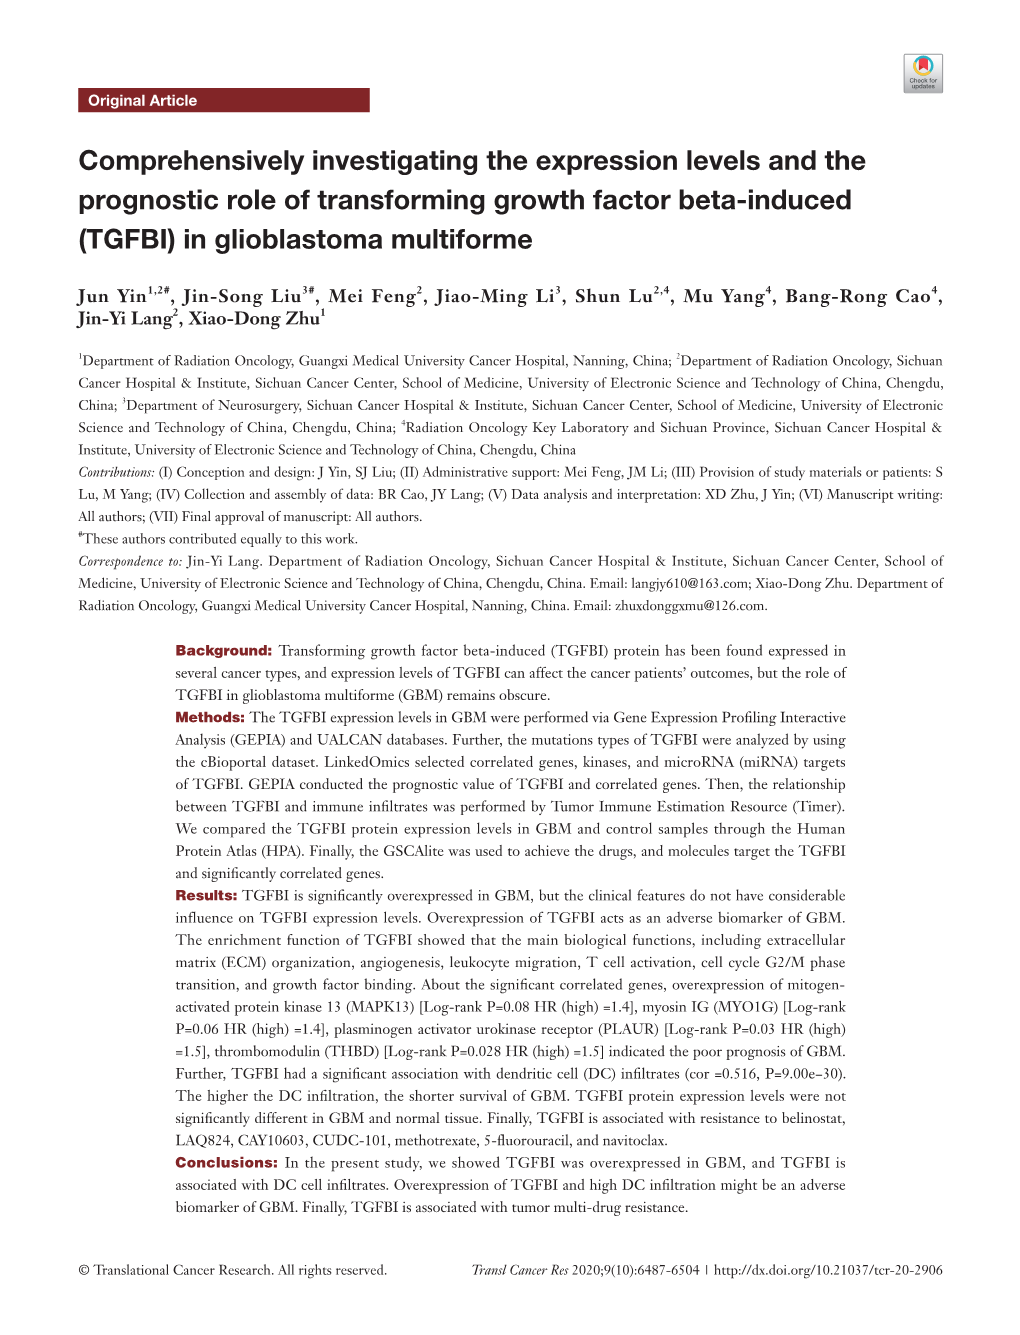 Comprehensively Investigating the Expression Levels and the Prognostic Role of Transforming Growth Factor Beta-Induced (TGFBI) in Glioblastoma Multiforme